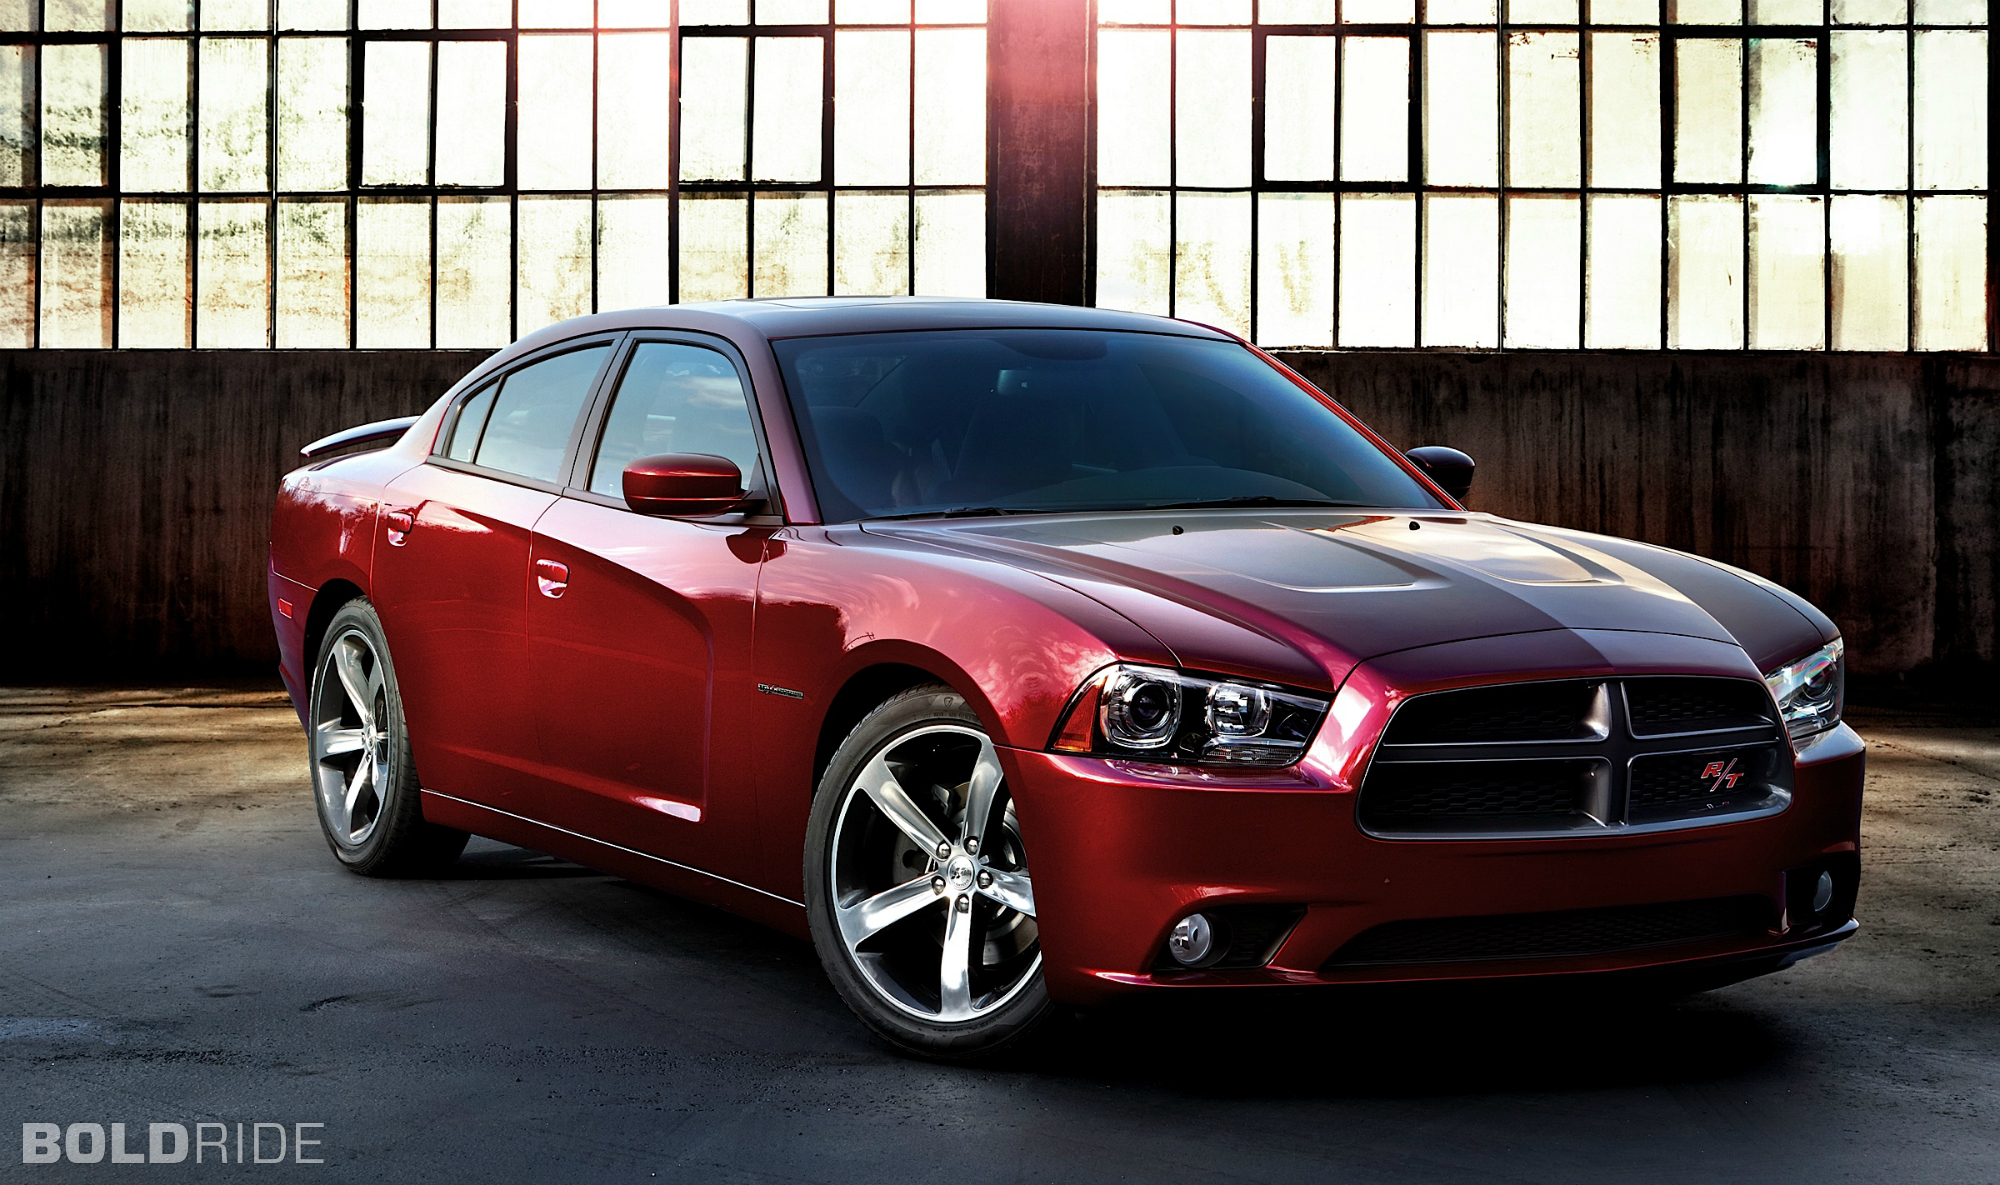 2014, Dodge, Charger, Muscle, Fr Wallpaper